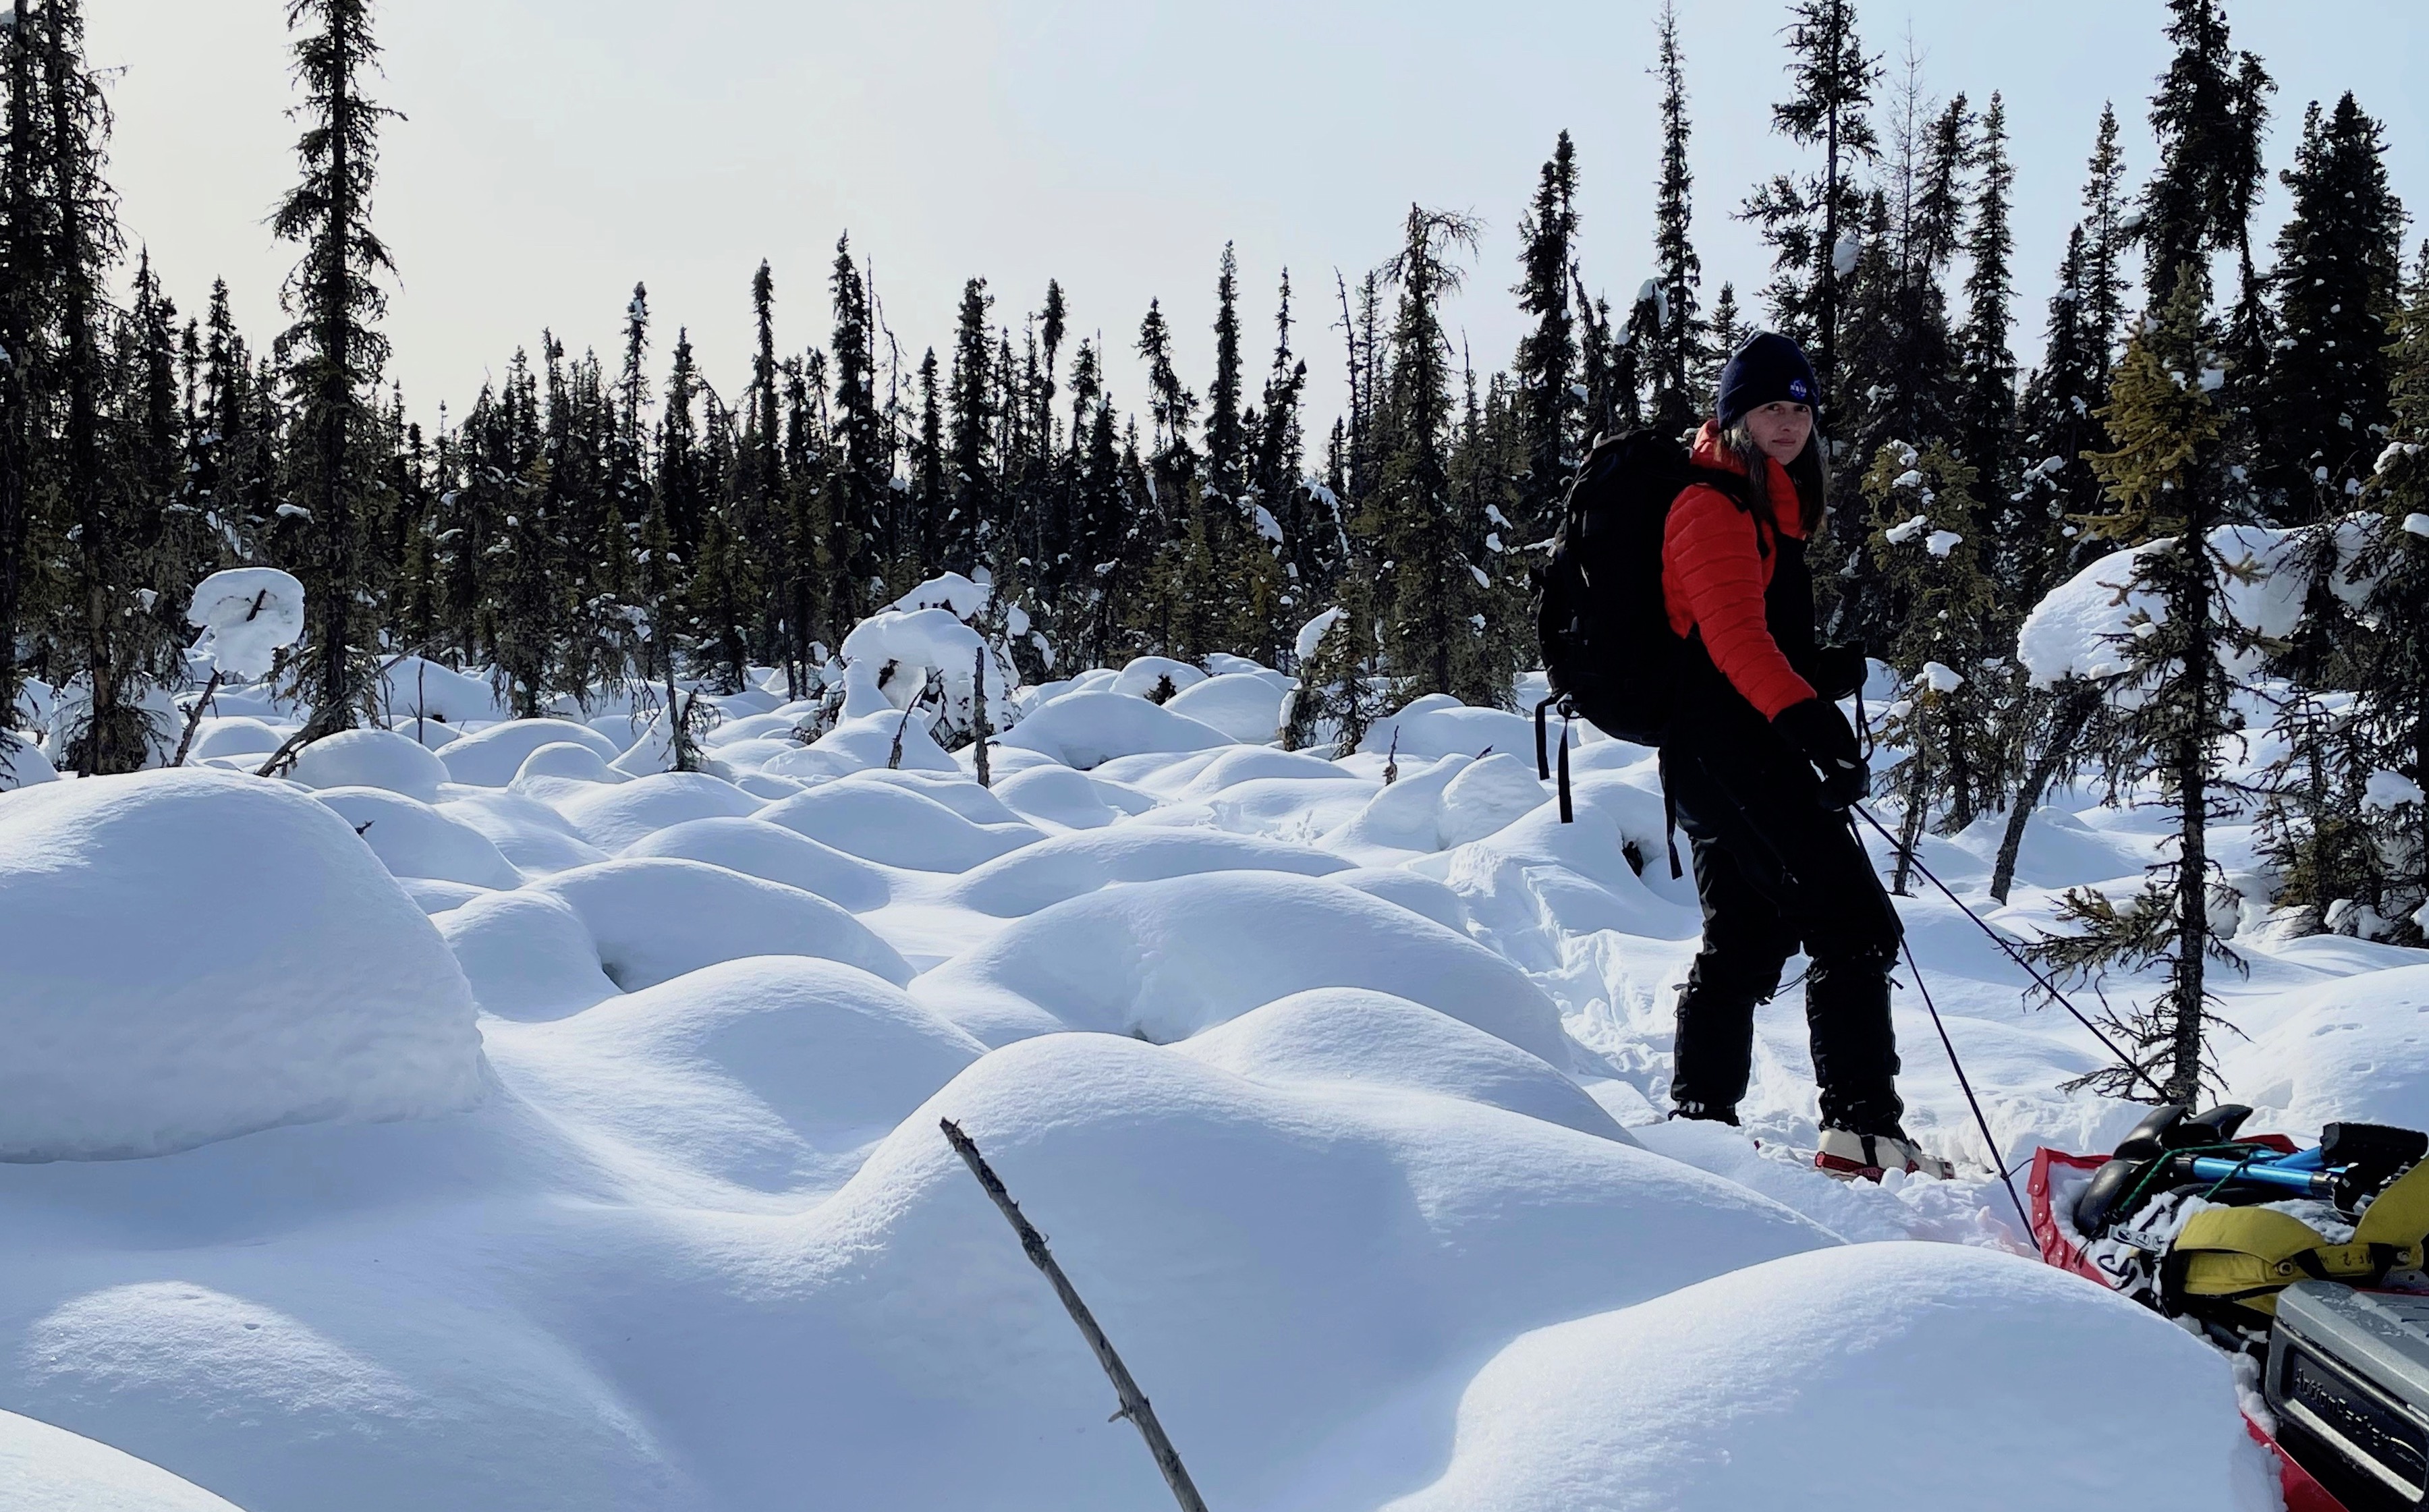 A woman dressed in winter gear wearing a backpack pulls a sled laden with tools through mounds of snow towards a forest of spruce trees.